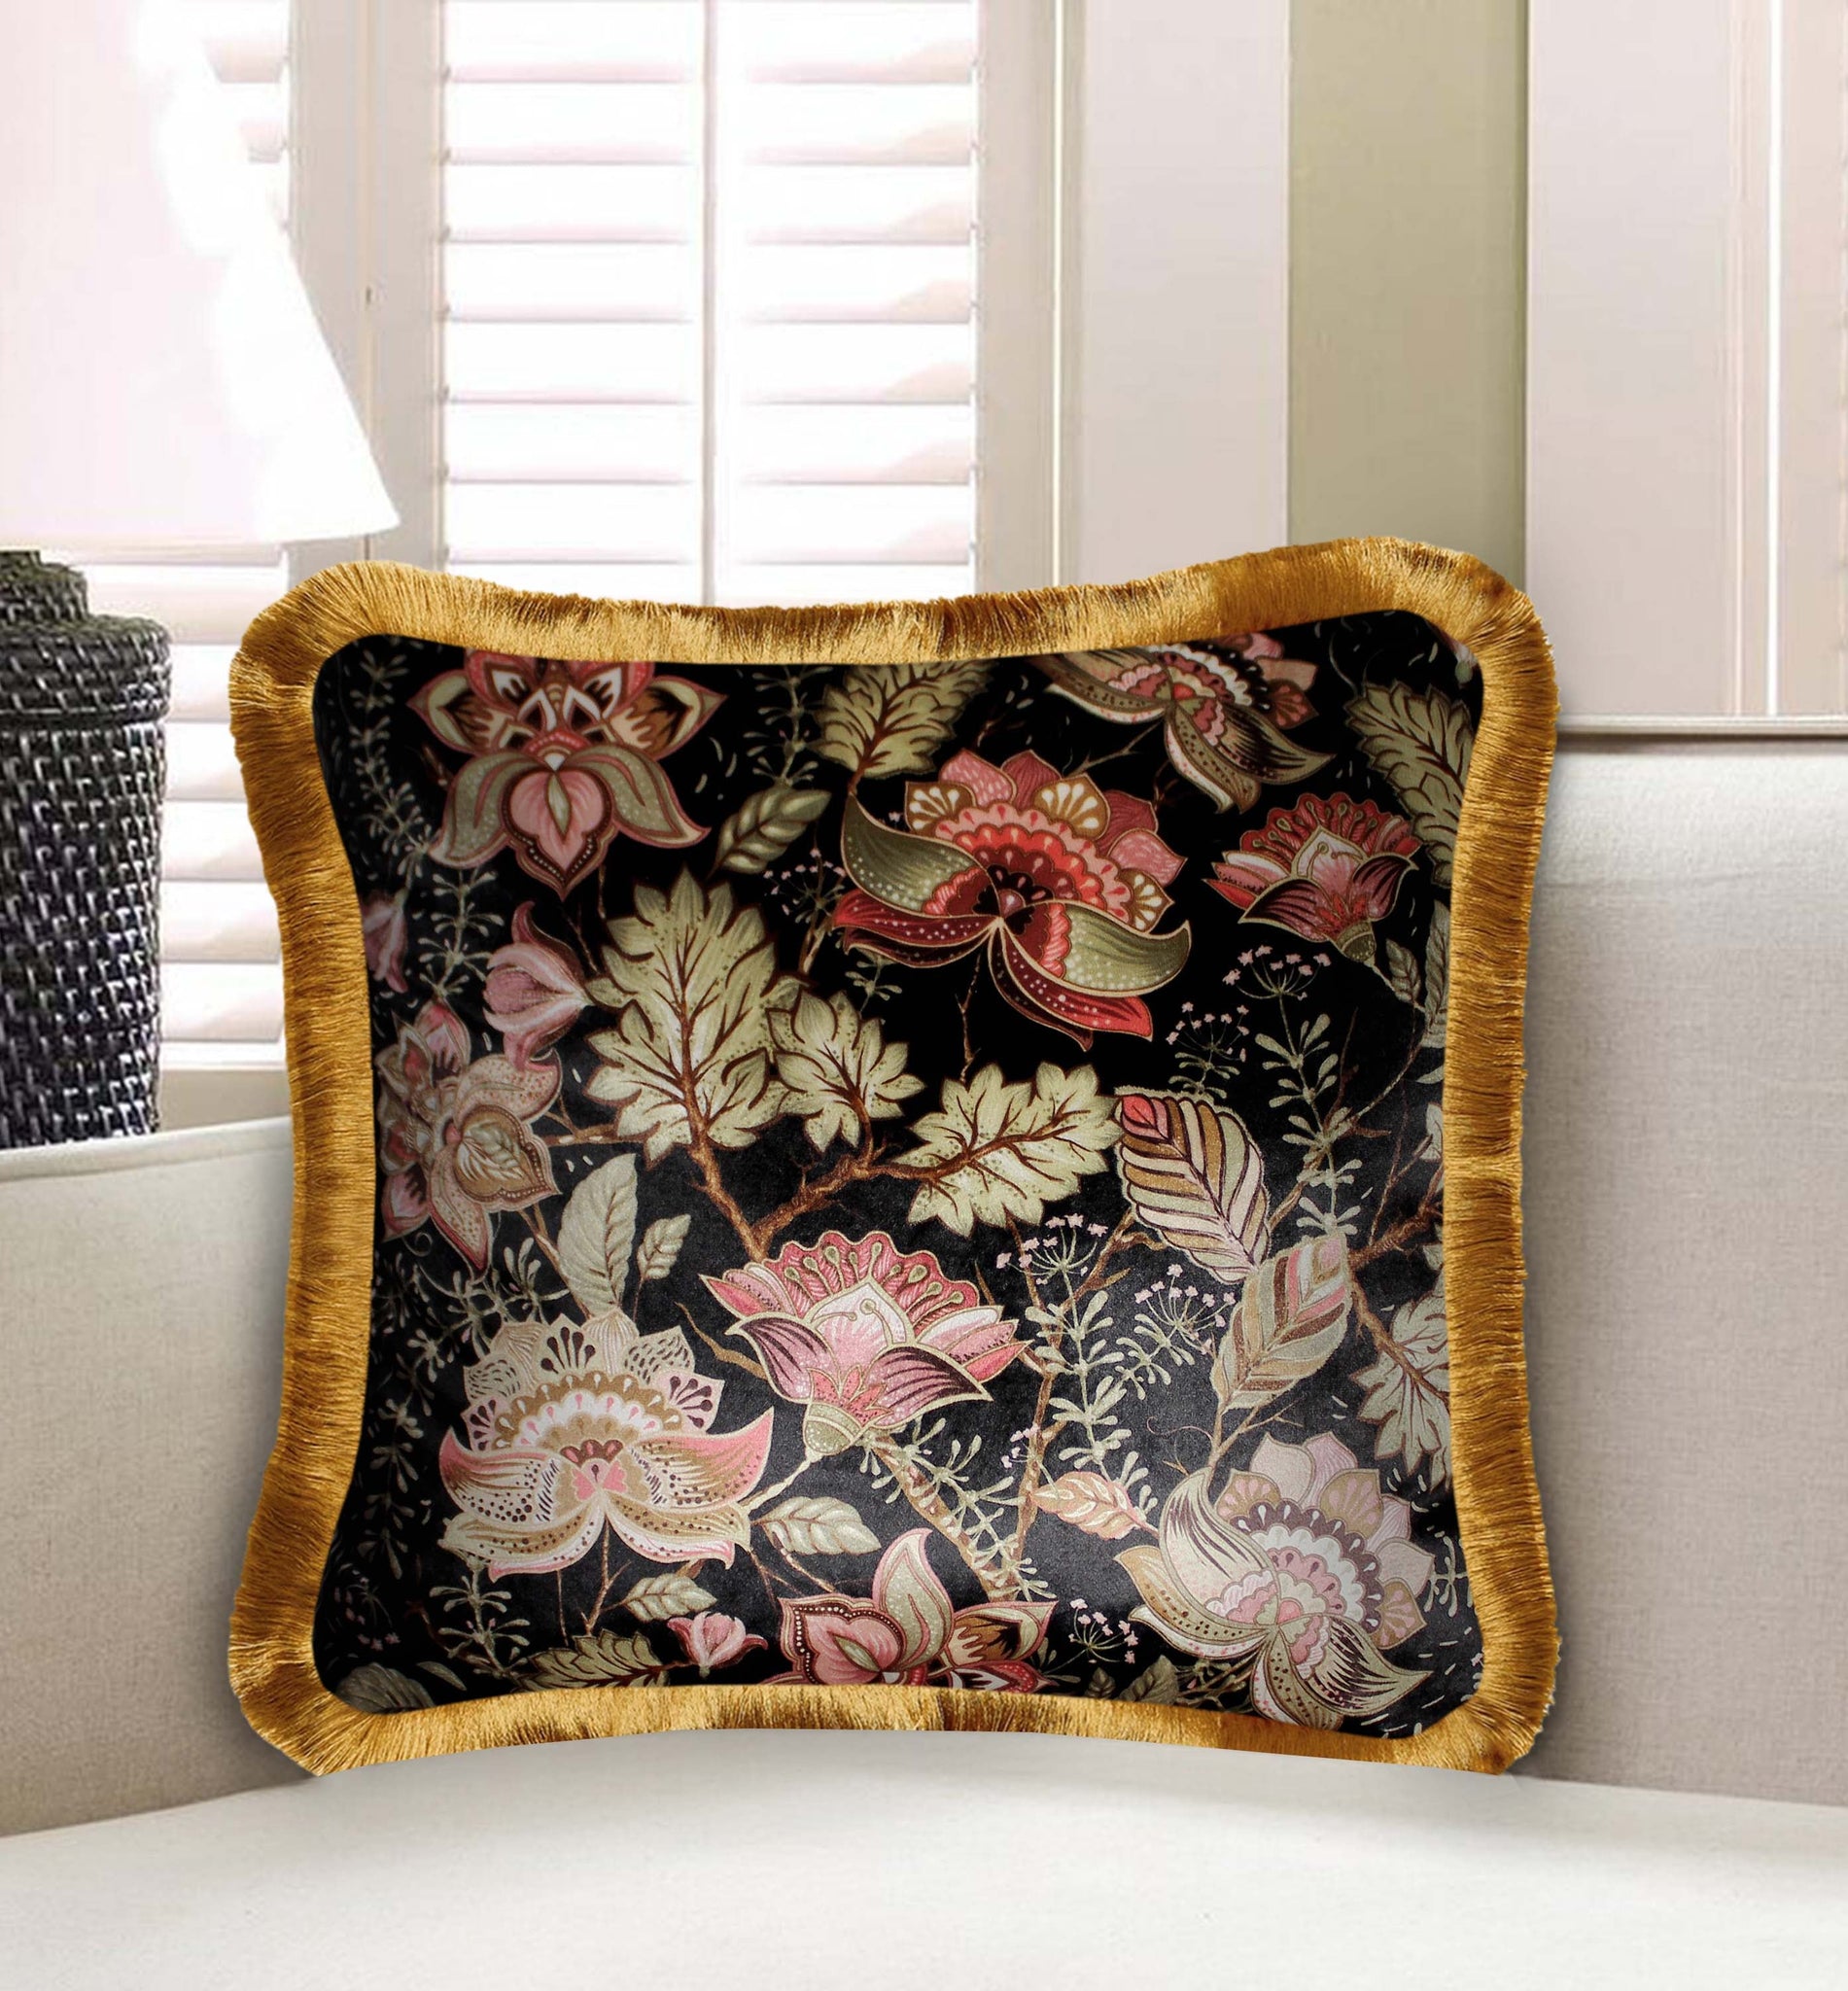 Black Velvet Cushion Cover Exotic Floral Decorative Pillow Cover Home Decor Throw Pillow for Sofa Chair Couch Bedroom 45x45 cm 18x18 In